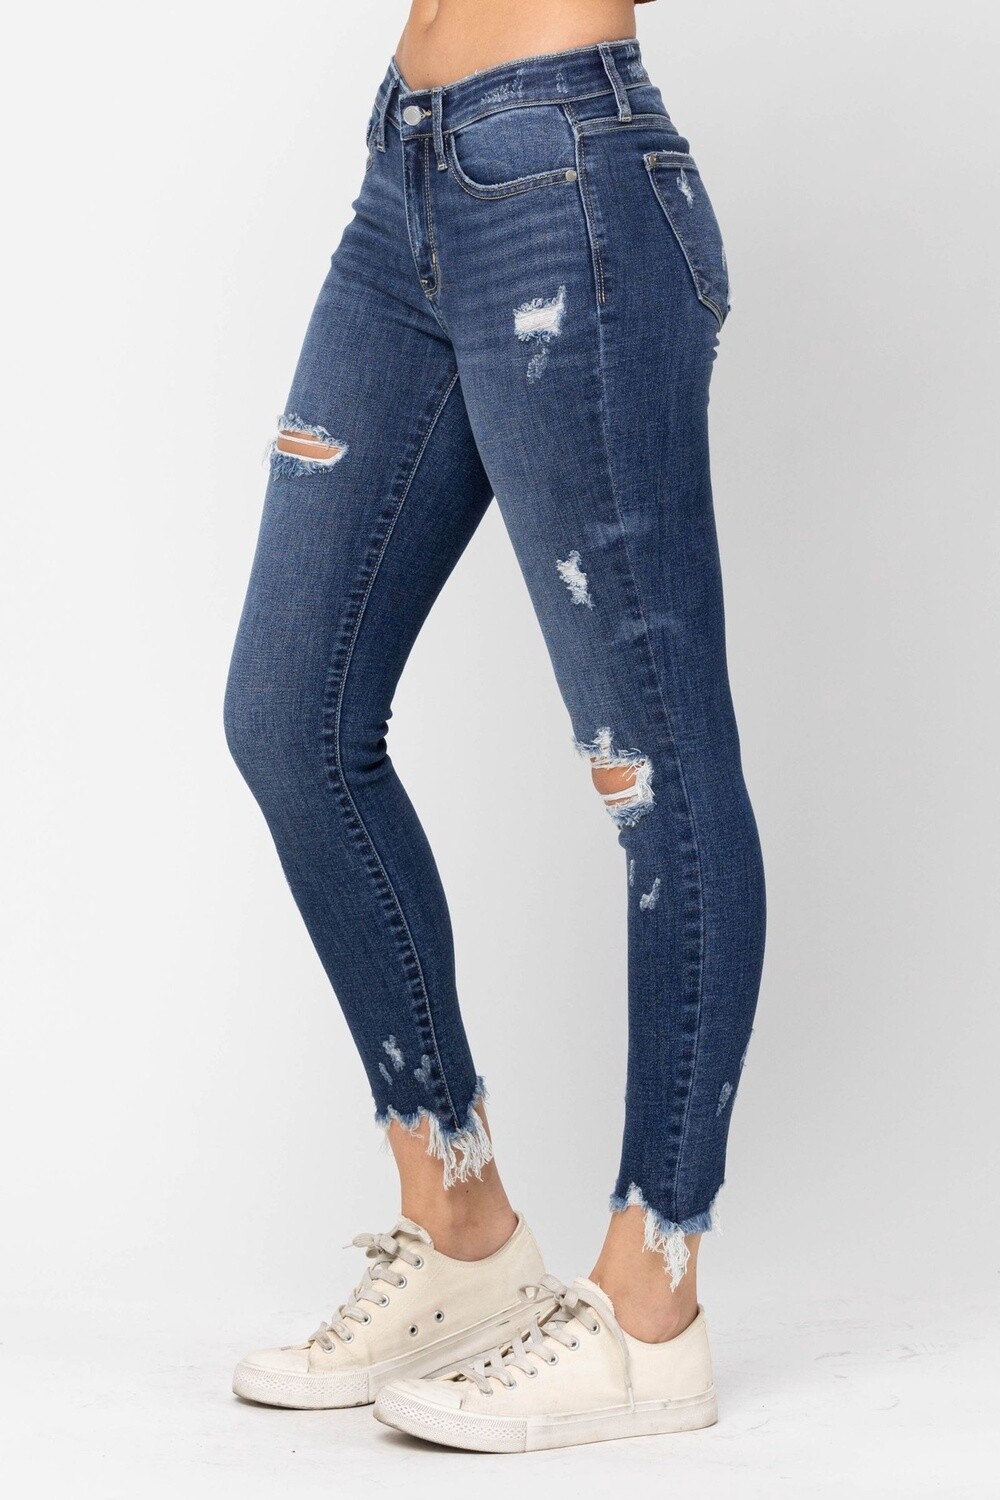 Women's Distressed Ankle Jeans #82265